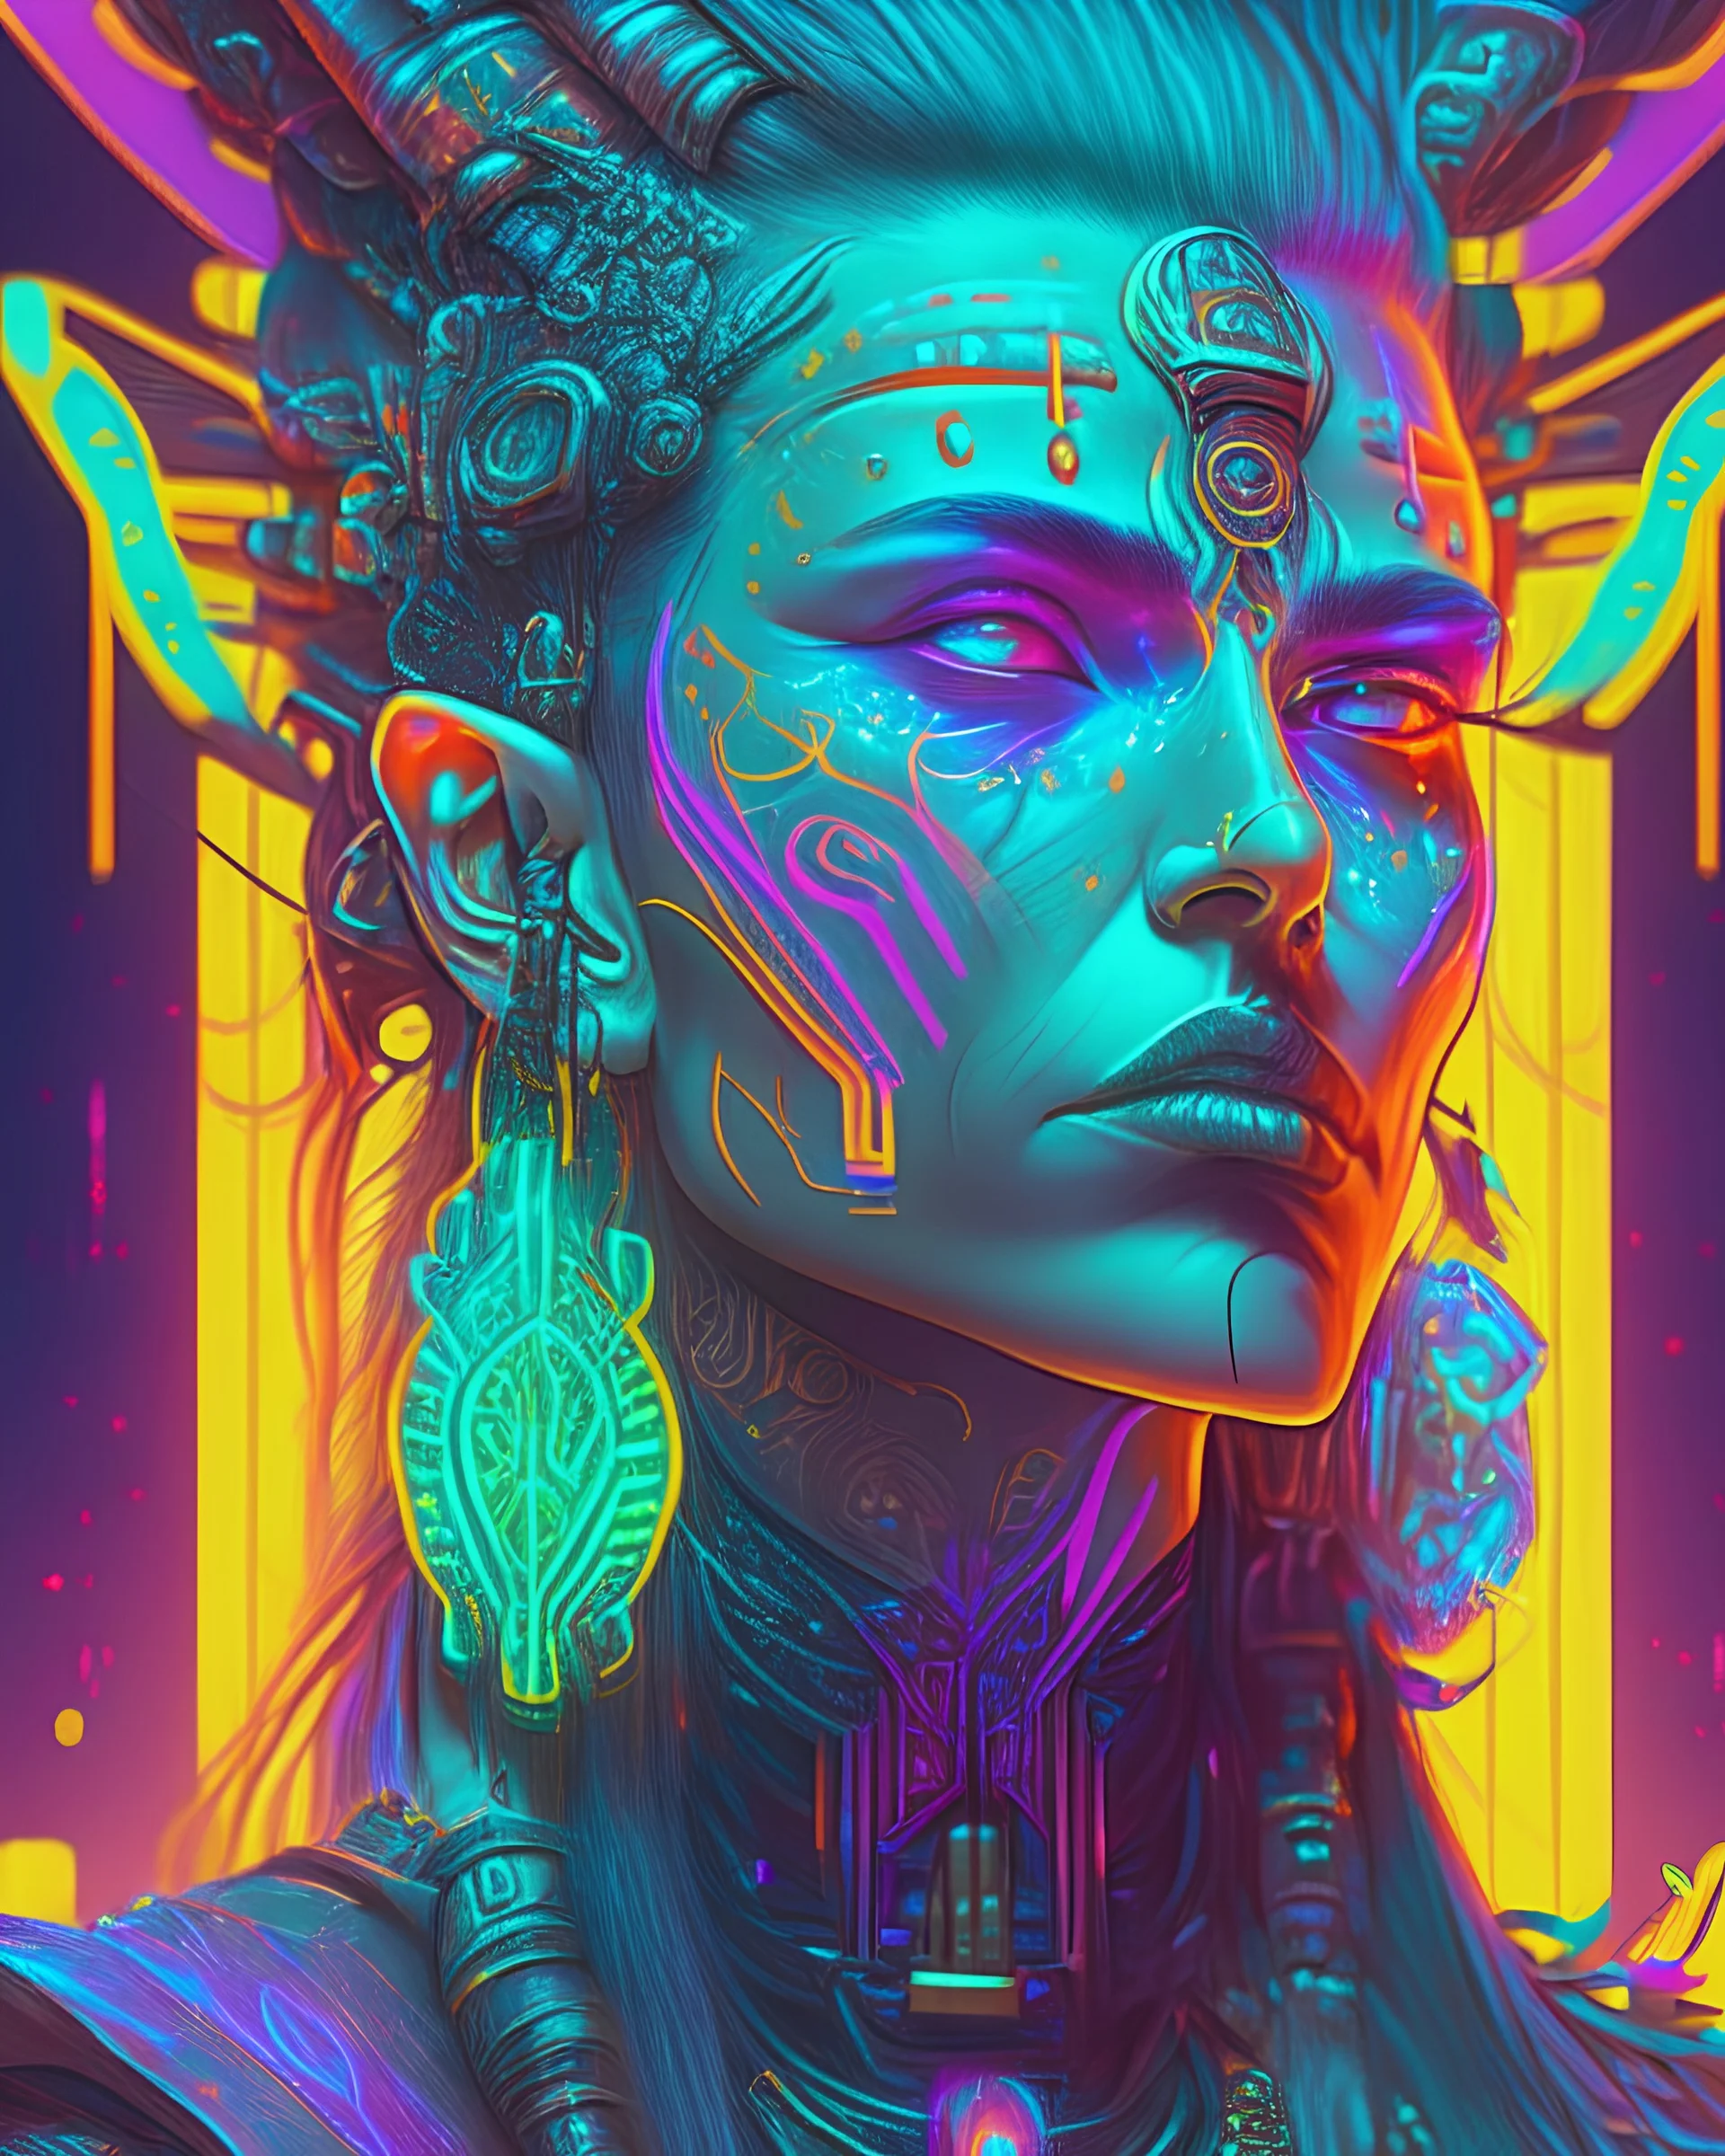 A captivating portrait of a futuristic shaman adorned with glowing tattoos and ethereal accessories, in the style of cyberpunk art, neon colors, intricate details, and expressive facial features, inspired by the works of Josan Gonzalez and Syd Mead, exploring the fusion of ancient spirituality and advanced technology.